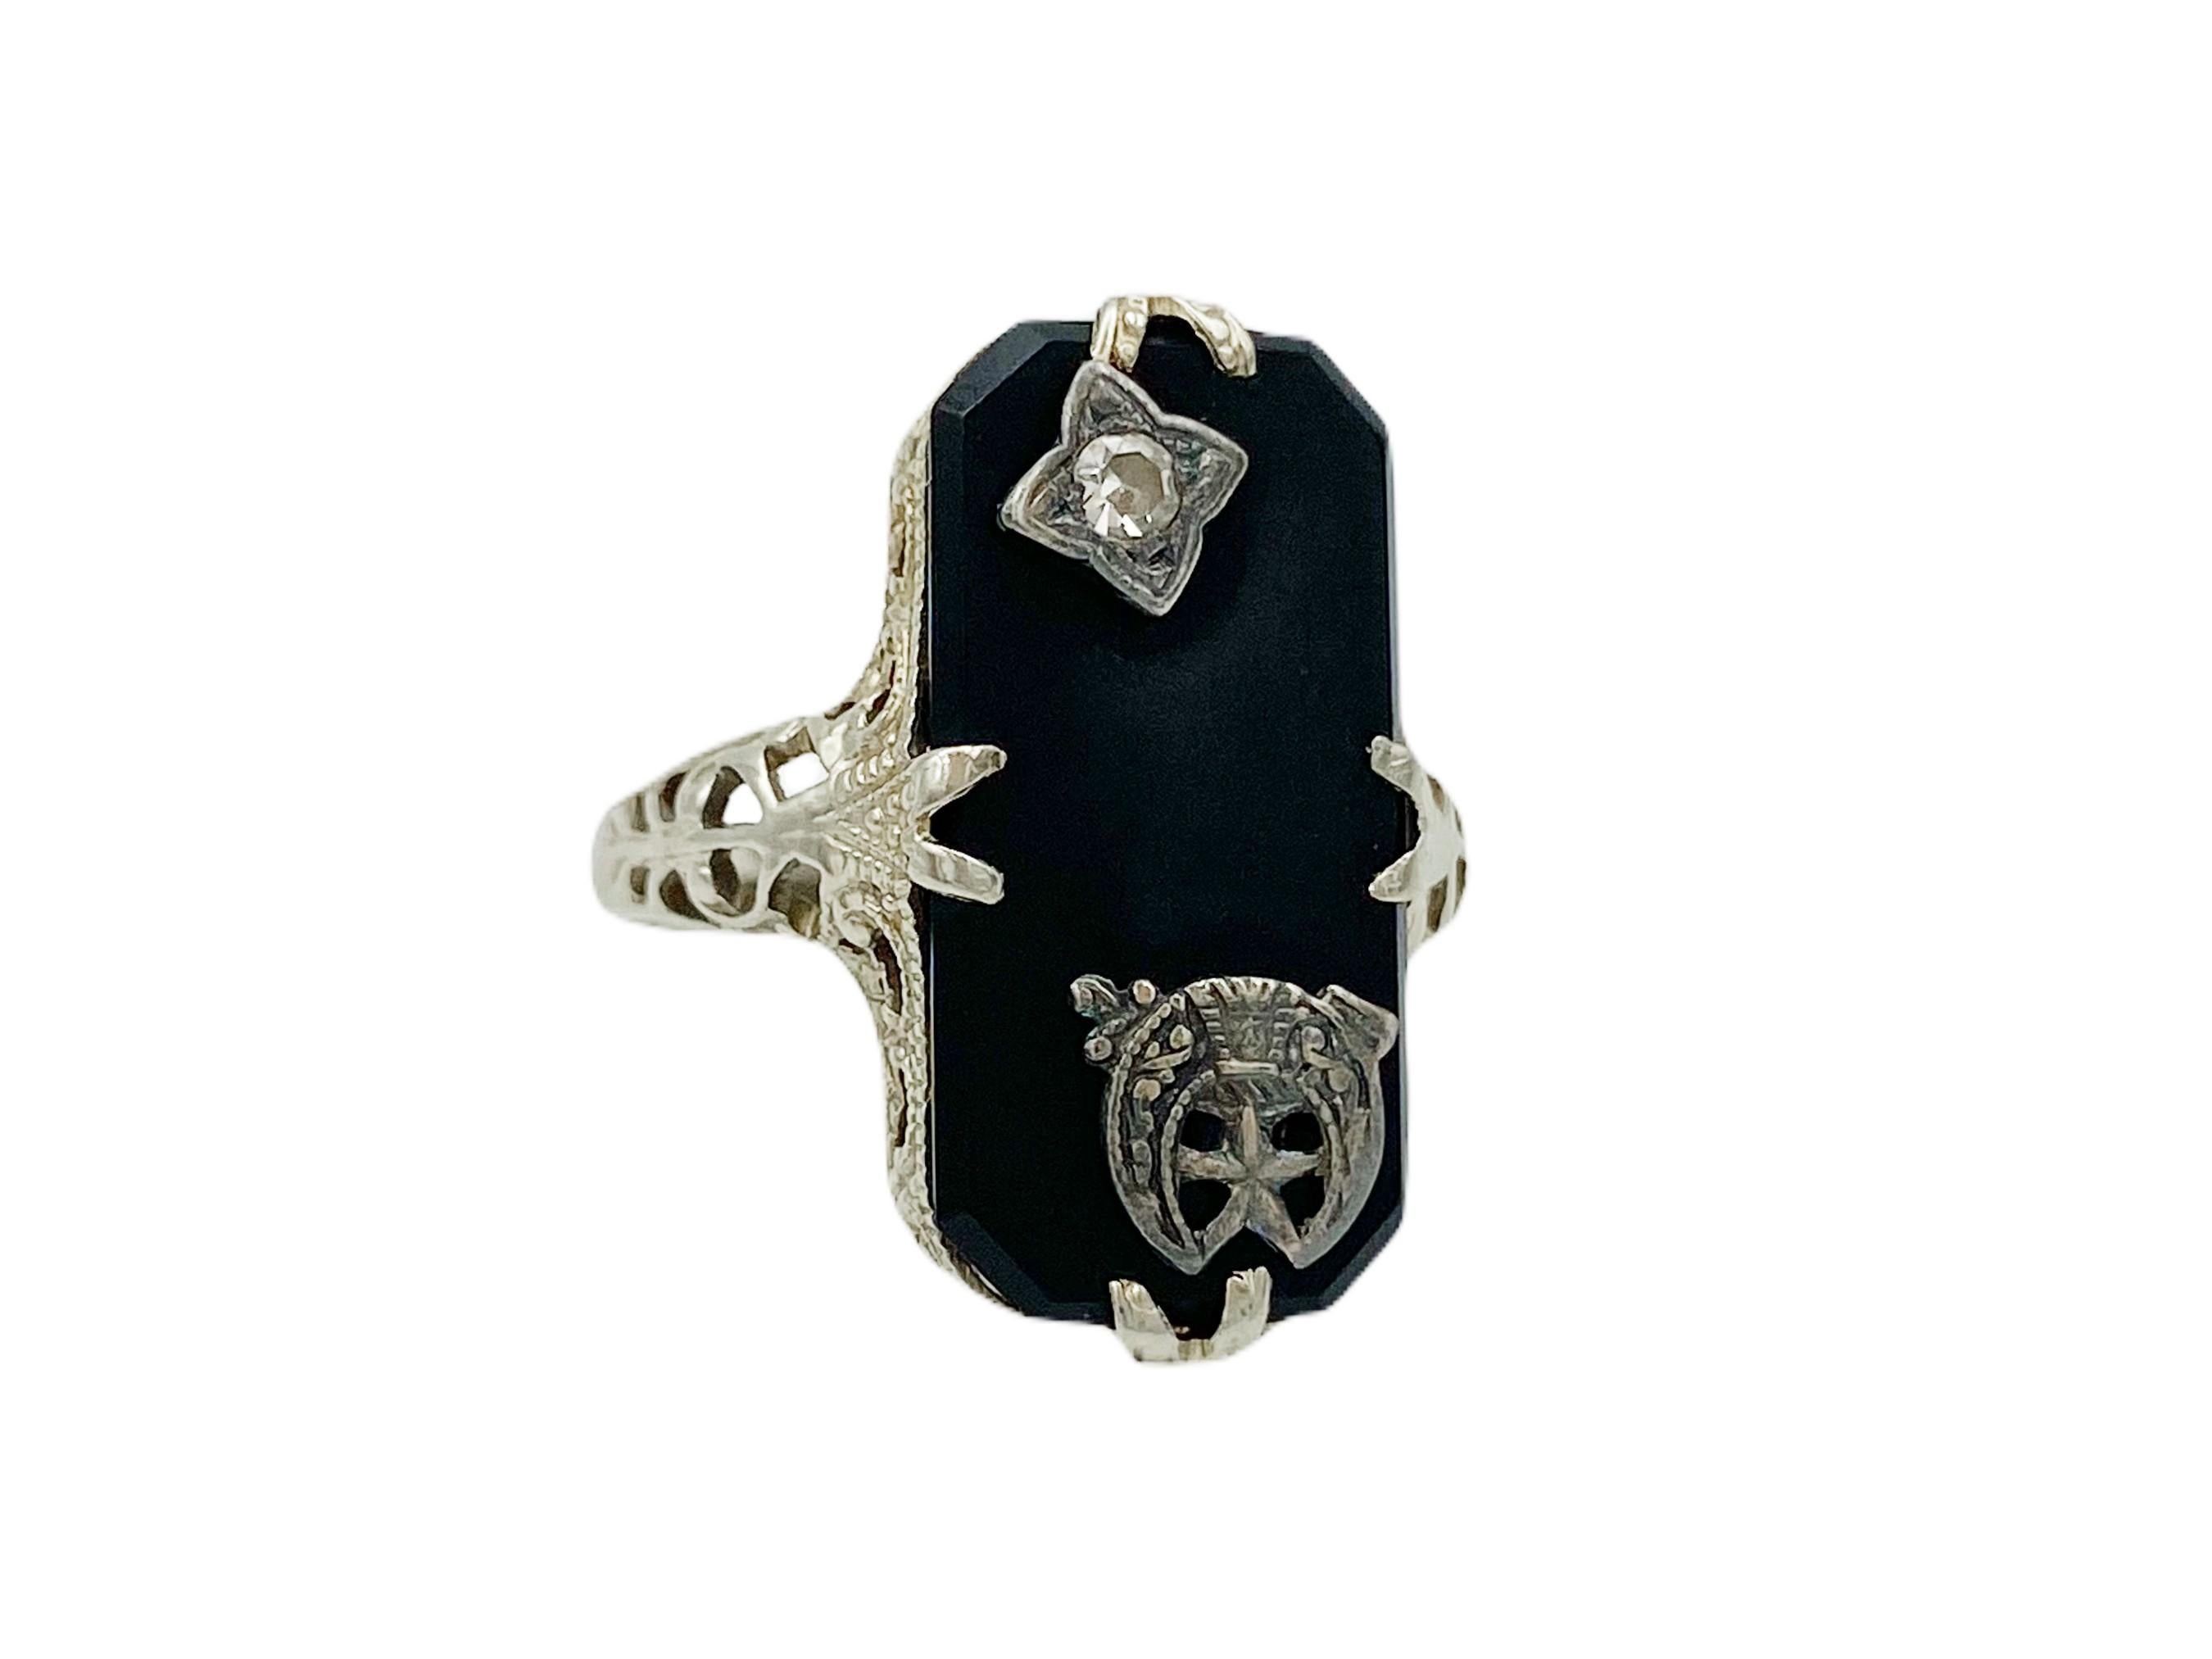 Lovely antique Victorian-era mourning ring in 14k white gold, circa the late 1800s. The face of the ring is a rectangular black onyx with angled corners set with ornate prongs. The onyx is accented with a single-cut 2mm diameter round diamond